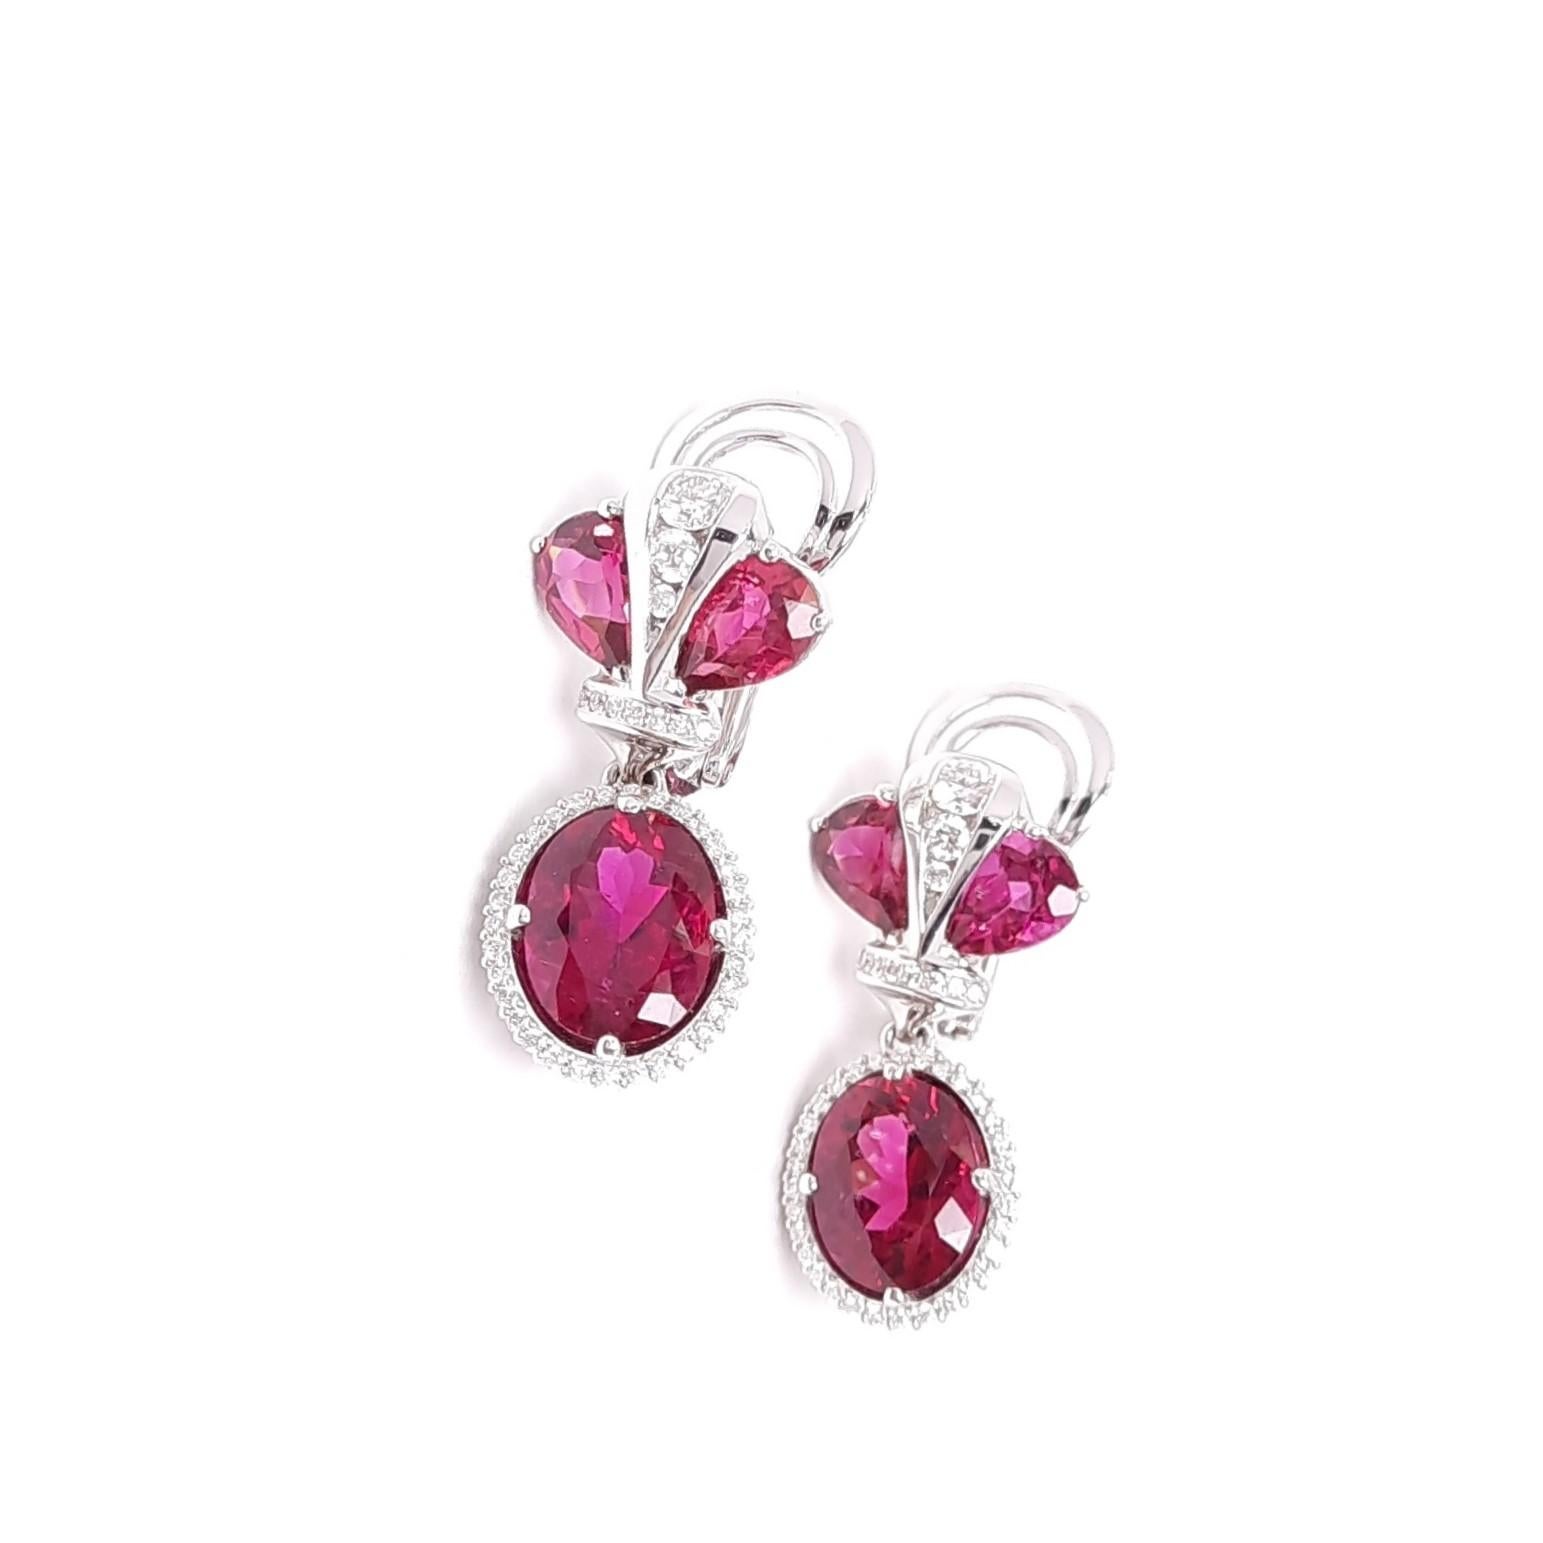 Elegant and classic, the earrings made of diamonds and vivid rubellite tourmalines, are inspired by the splendid period of Russian and Europe. Dedicated for the Imperial greatness, luxury, beauty, and noble aspiration, the crown shaped earrings from